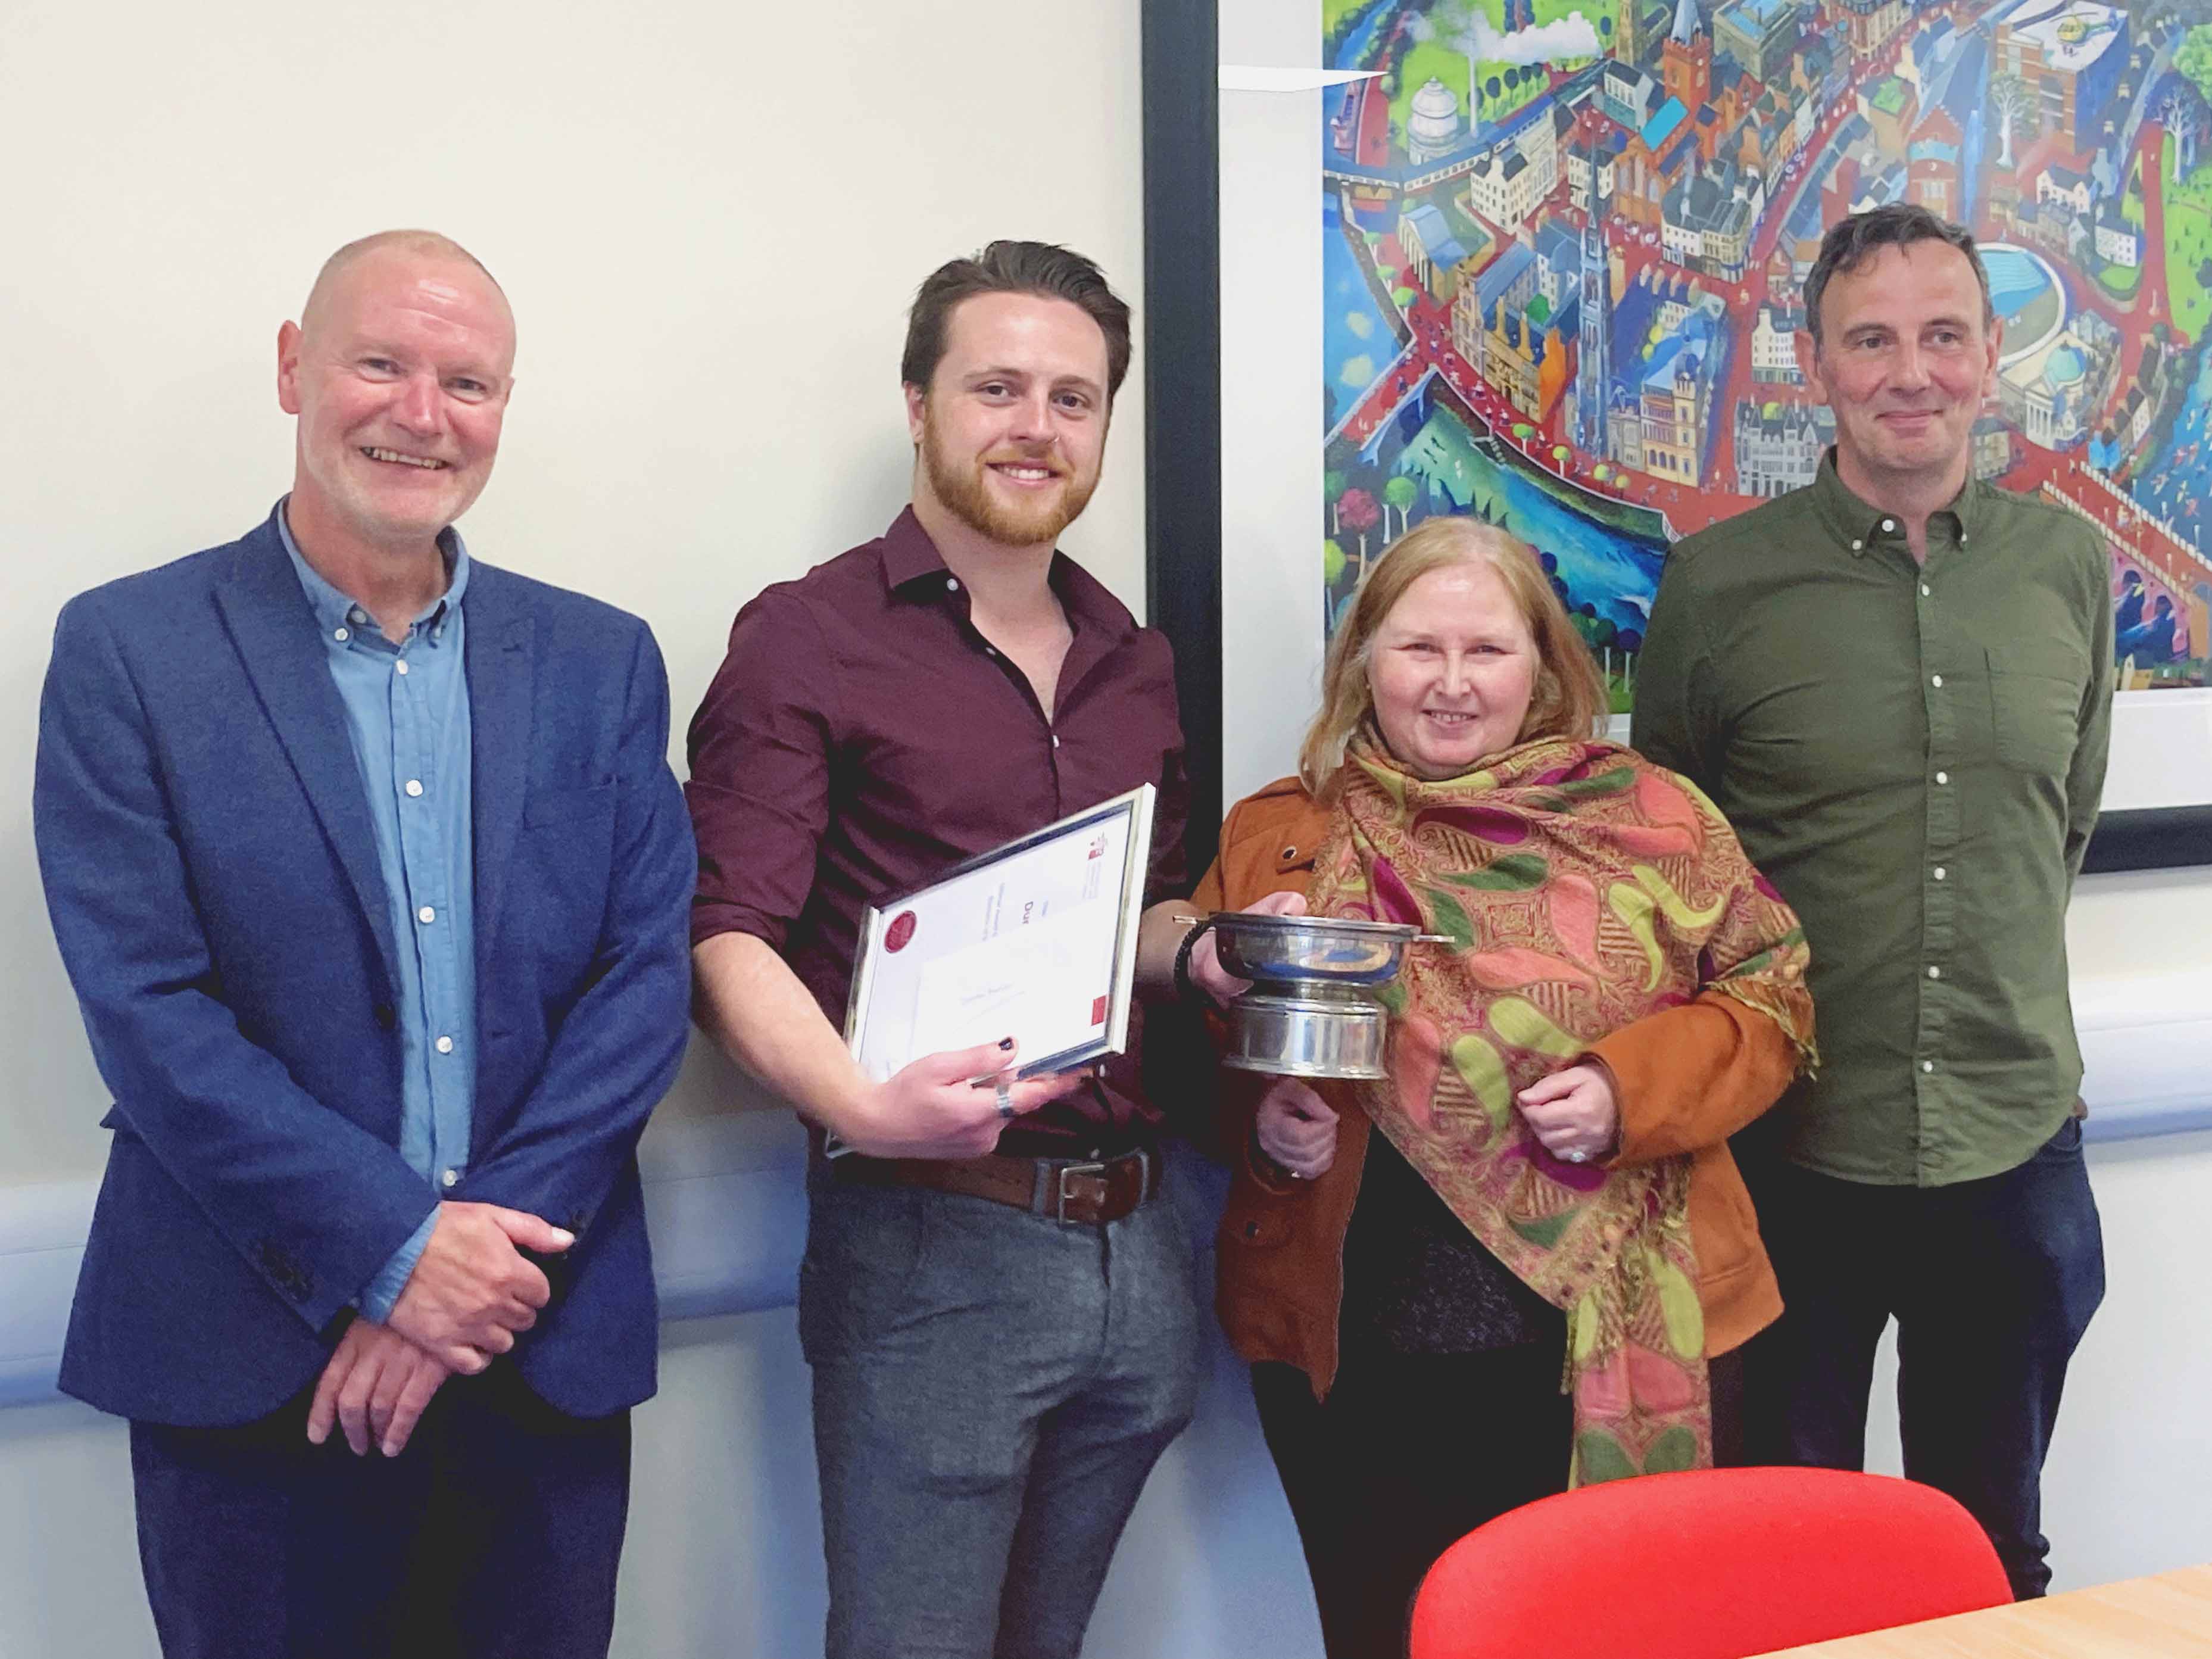 Audio student recognised with award
